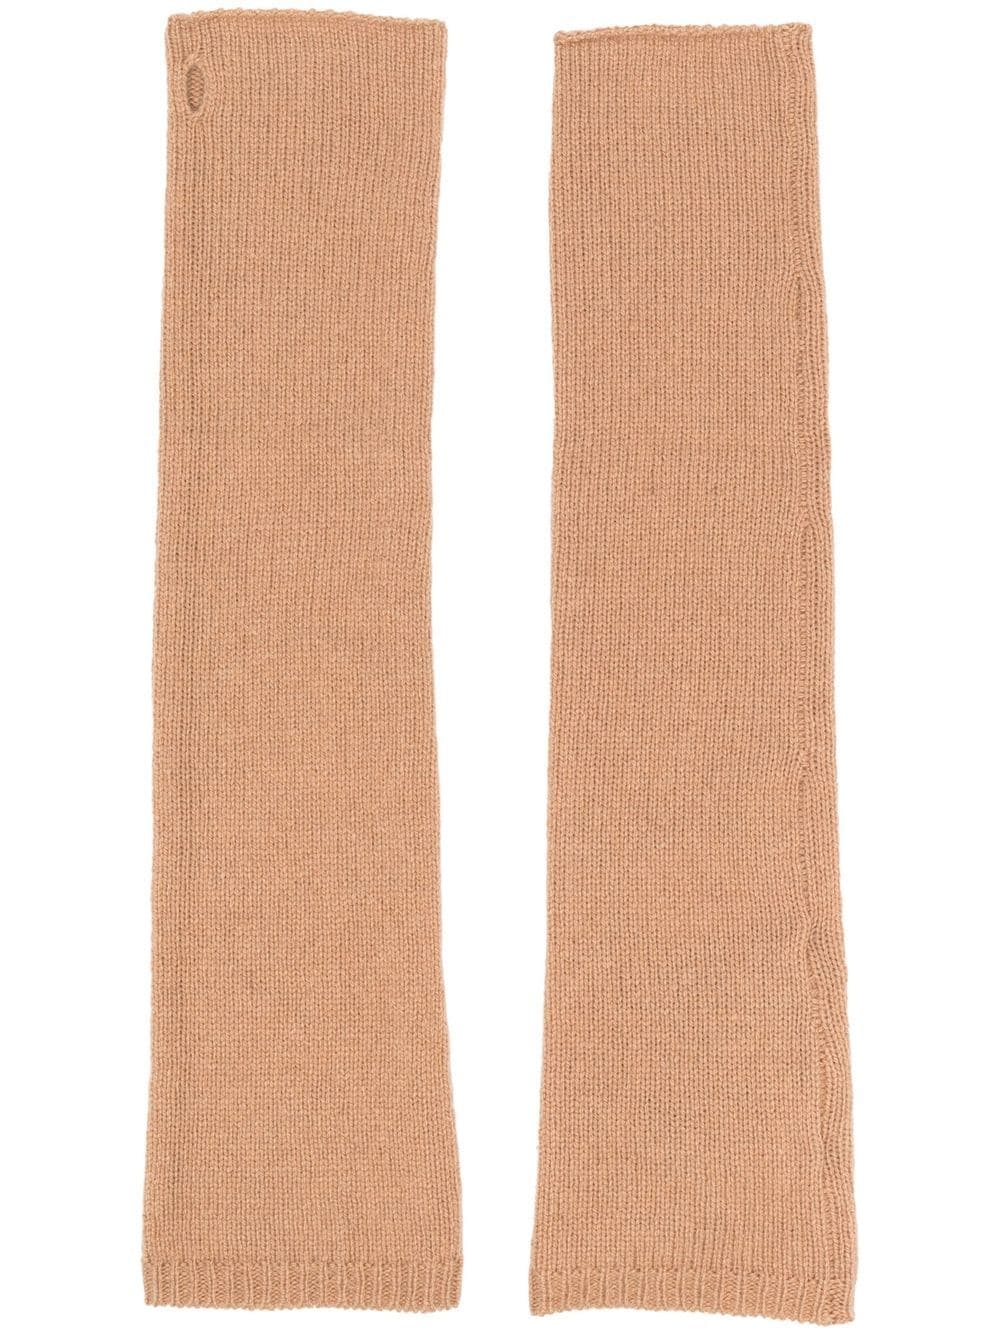 Federica Tosi knitted long-length sleeves - Neutrals von Federica Tosi